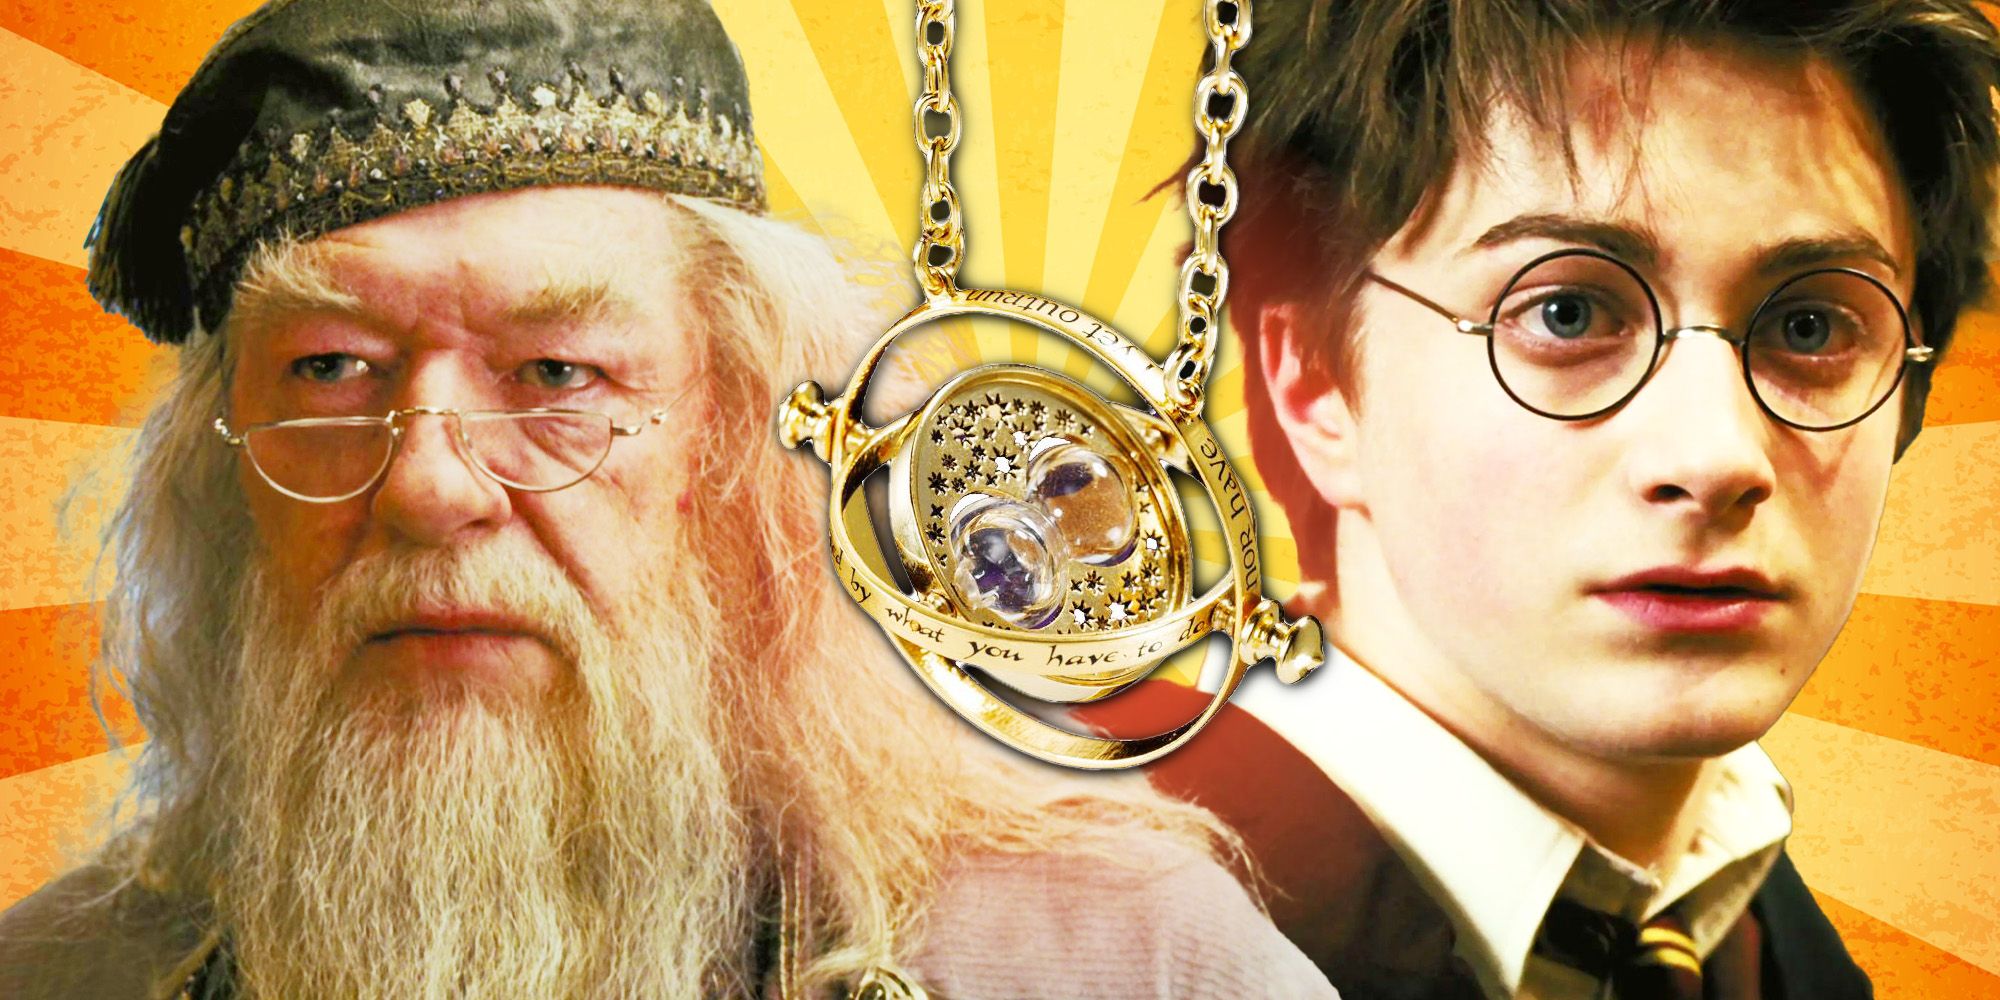 Dumbledore the time-turner and Harry Potter